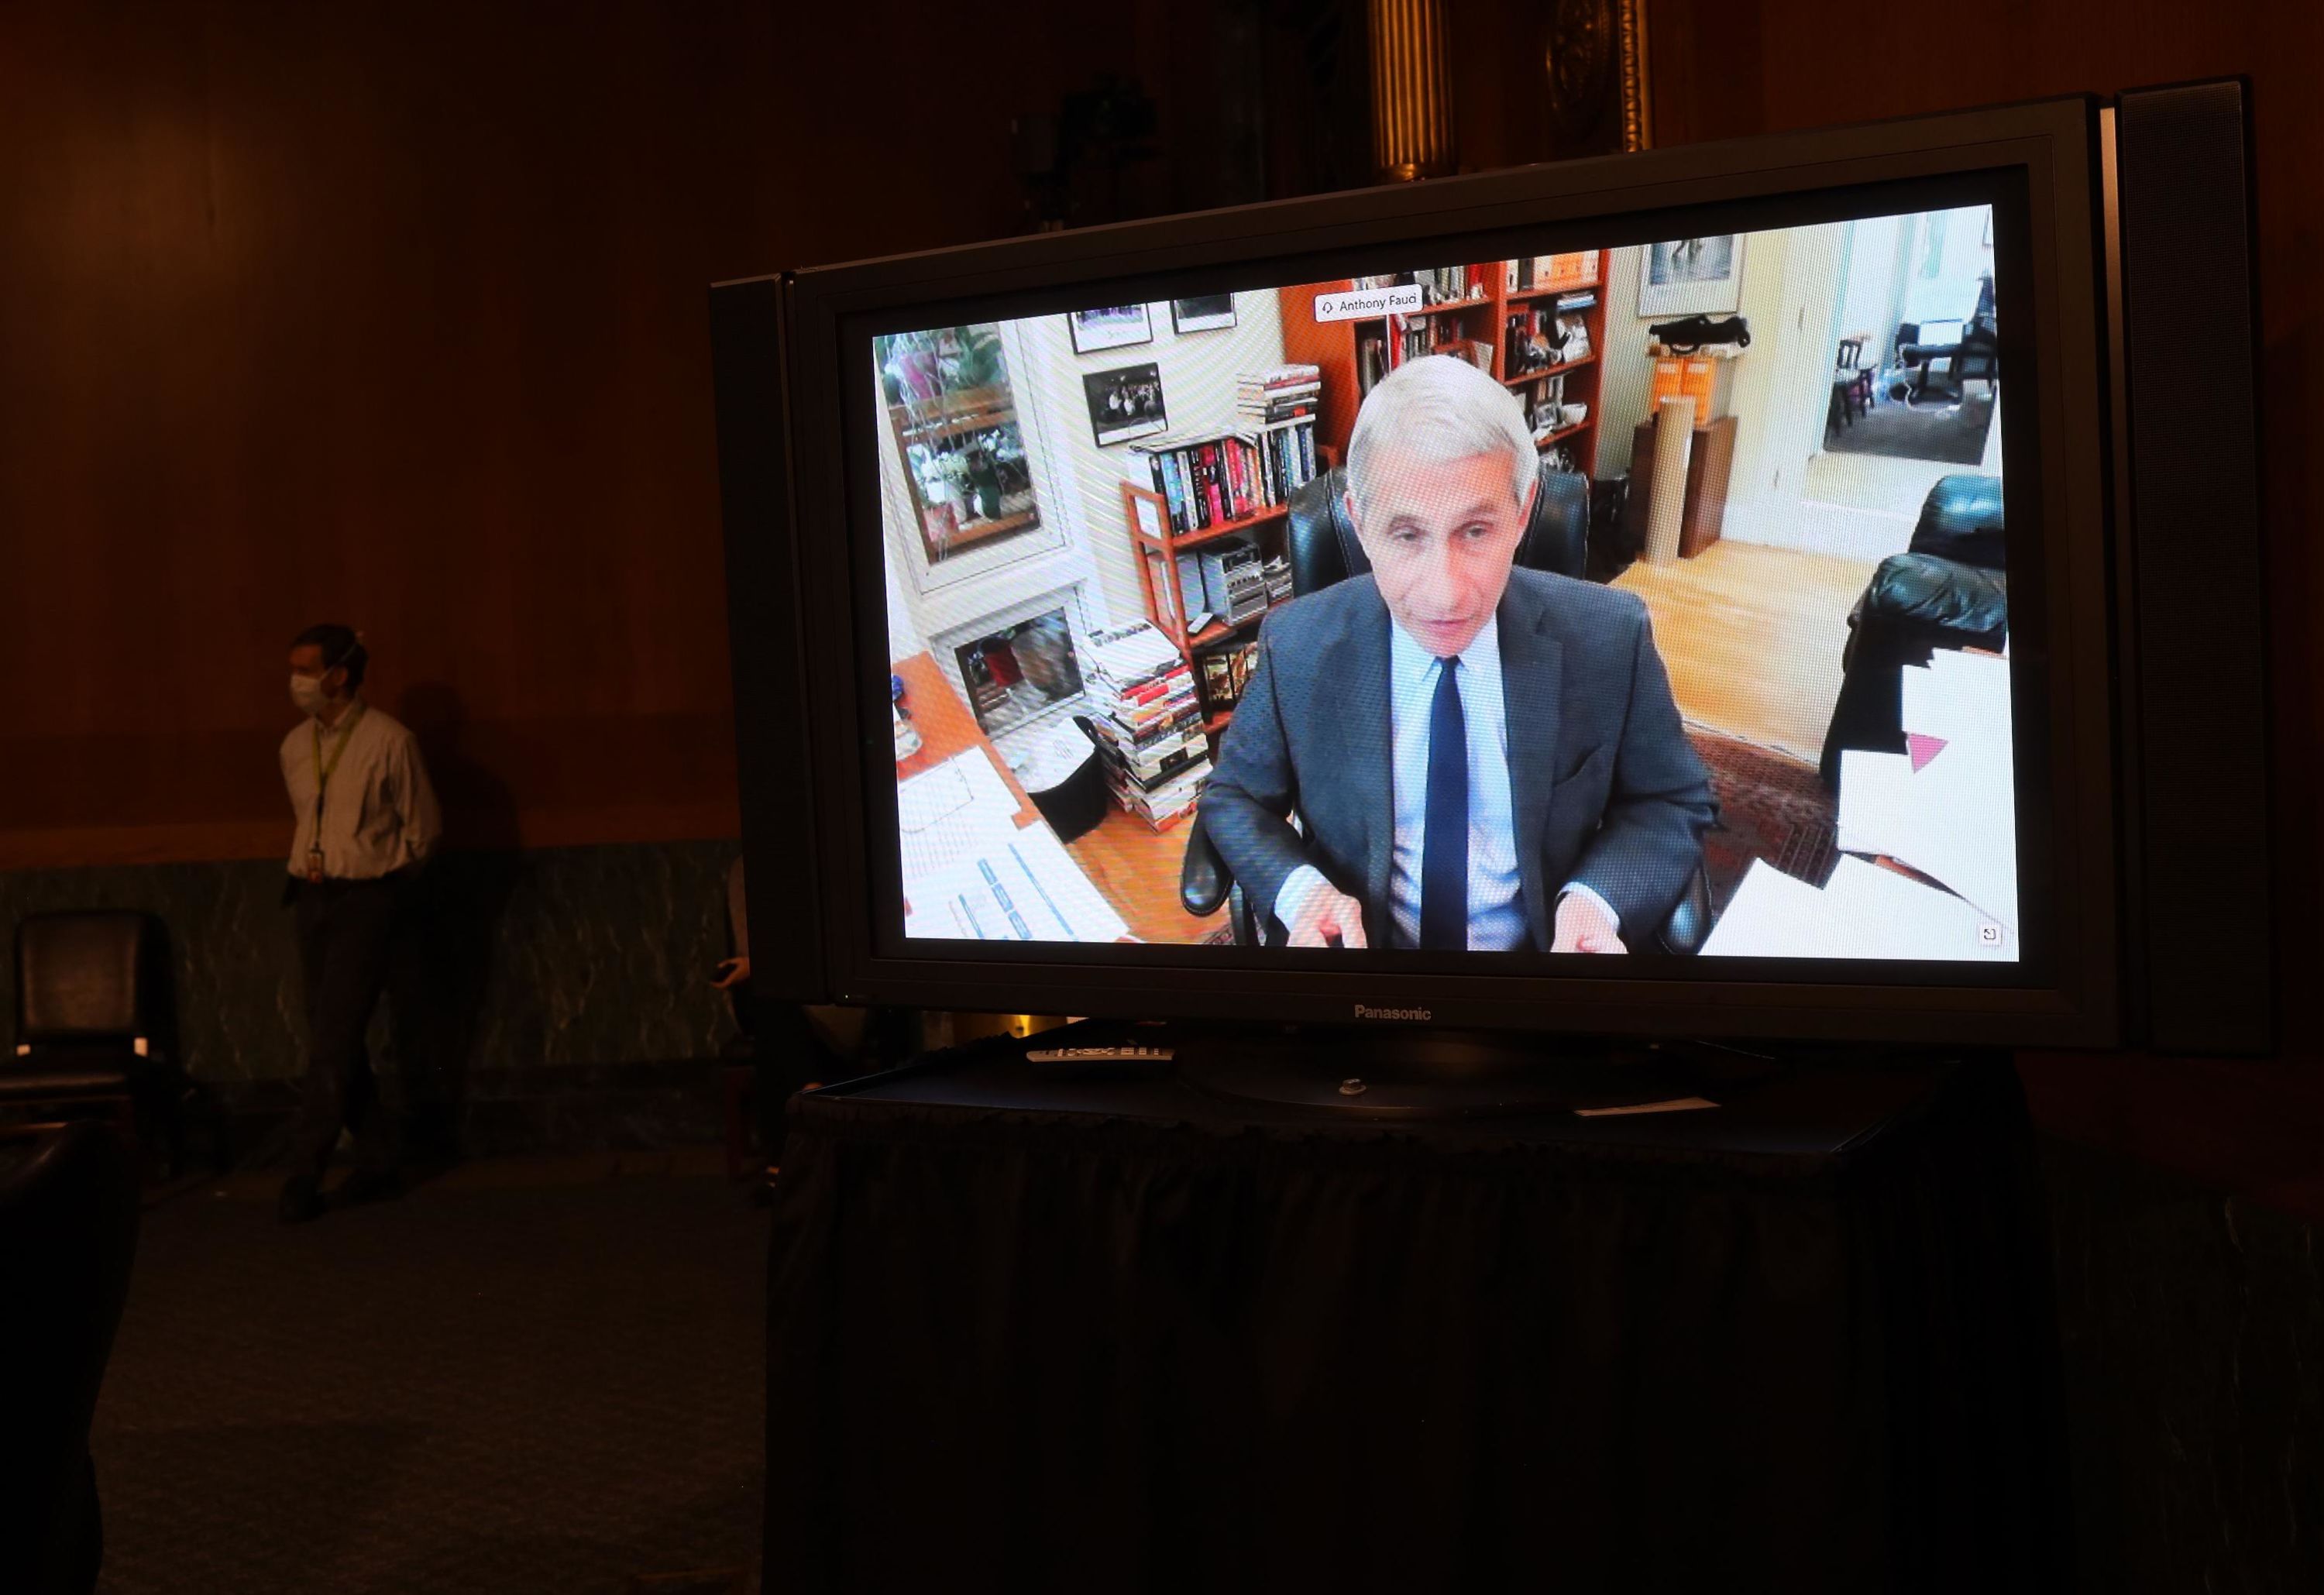 Dr. Anthony Fauci, director of the National Institute of Allergy and Infectious Diseases, speaks remotely during a Senate hearing on Tuesday, May 12.